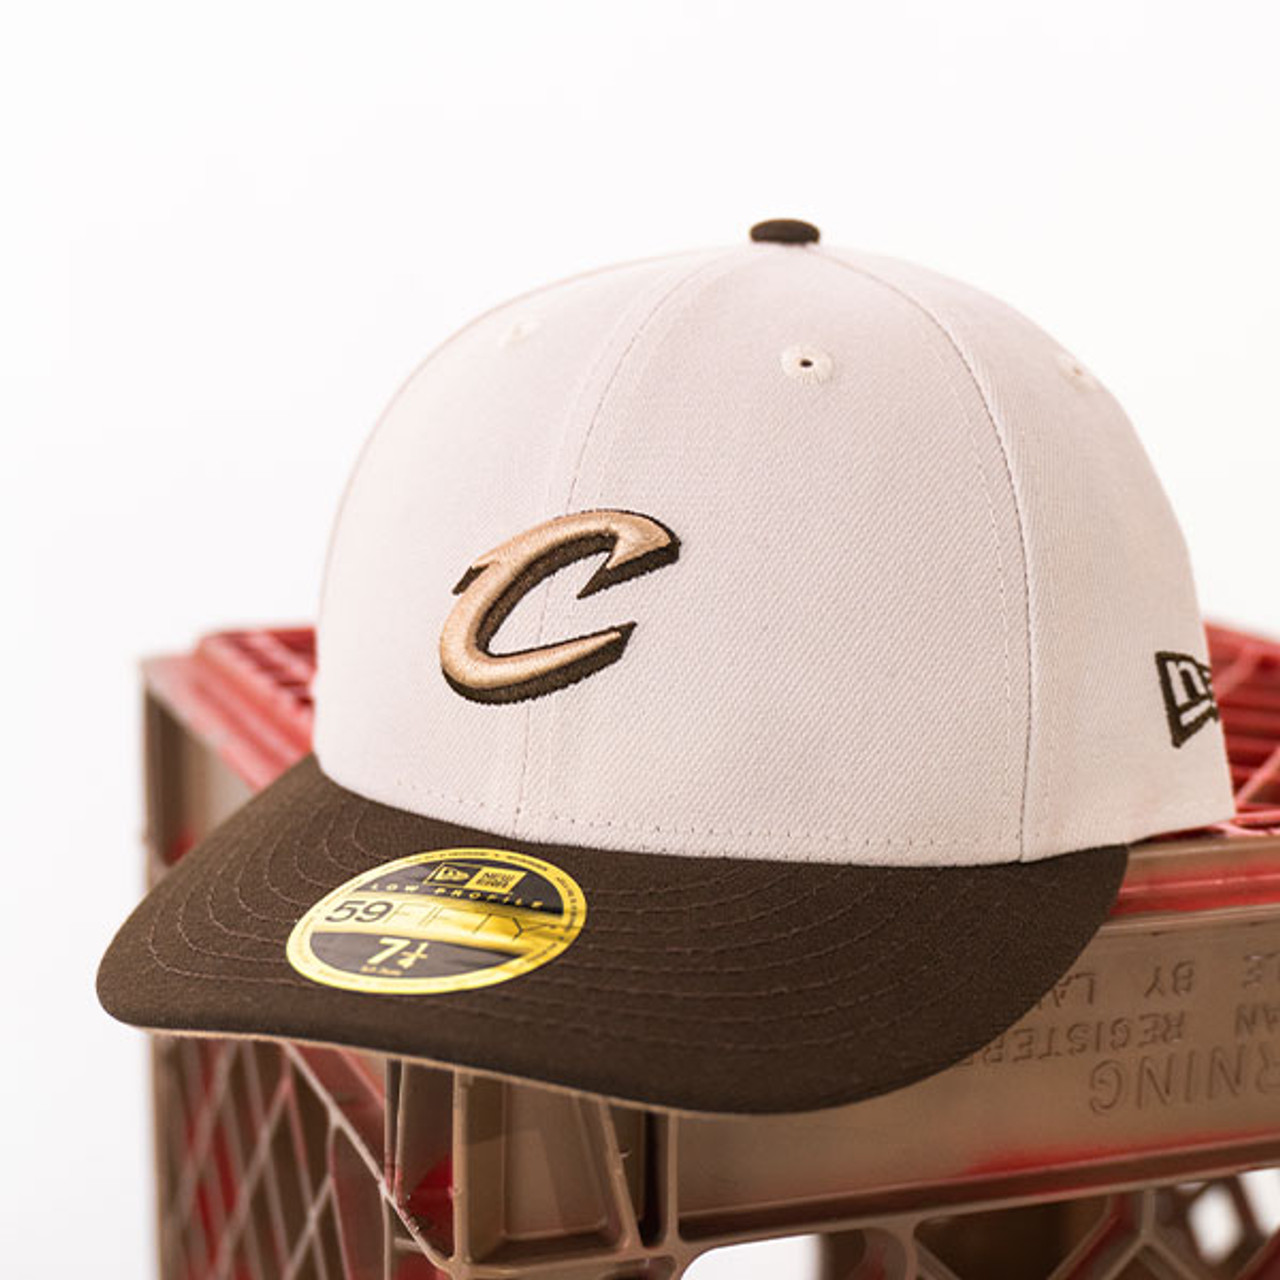 New Era Brown Low Profile Fitted Cap in Tan Size 7 3/4 | Cavaliers